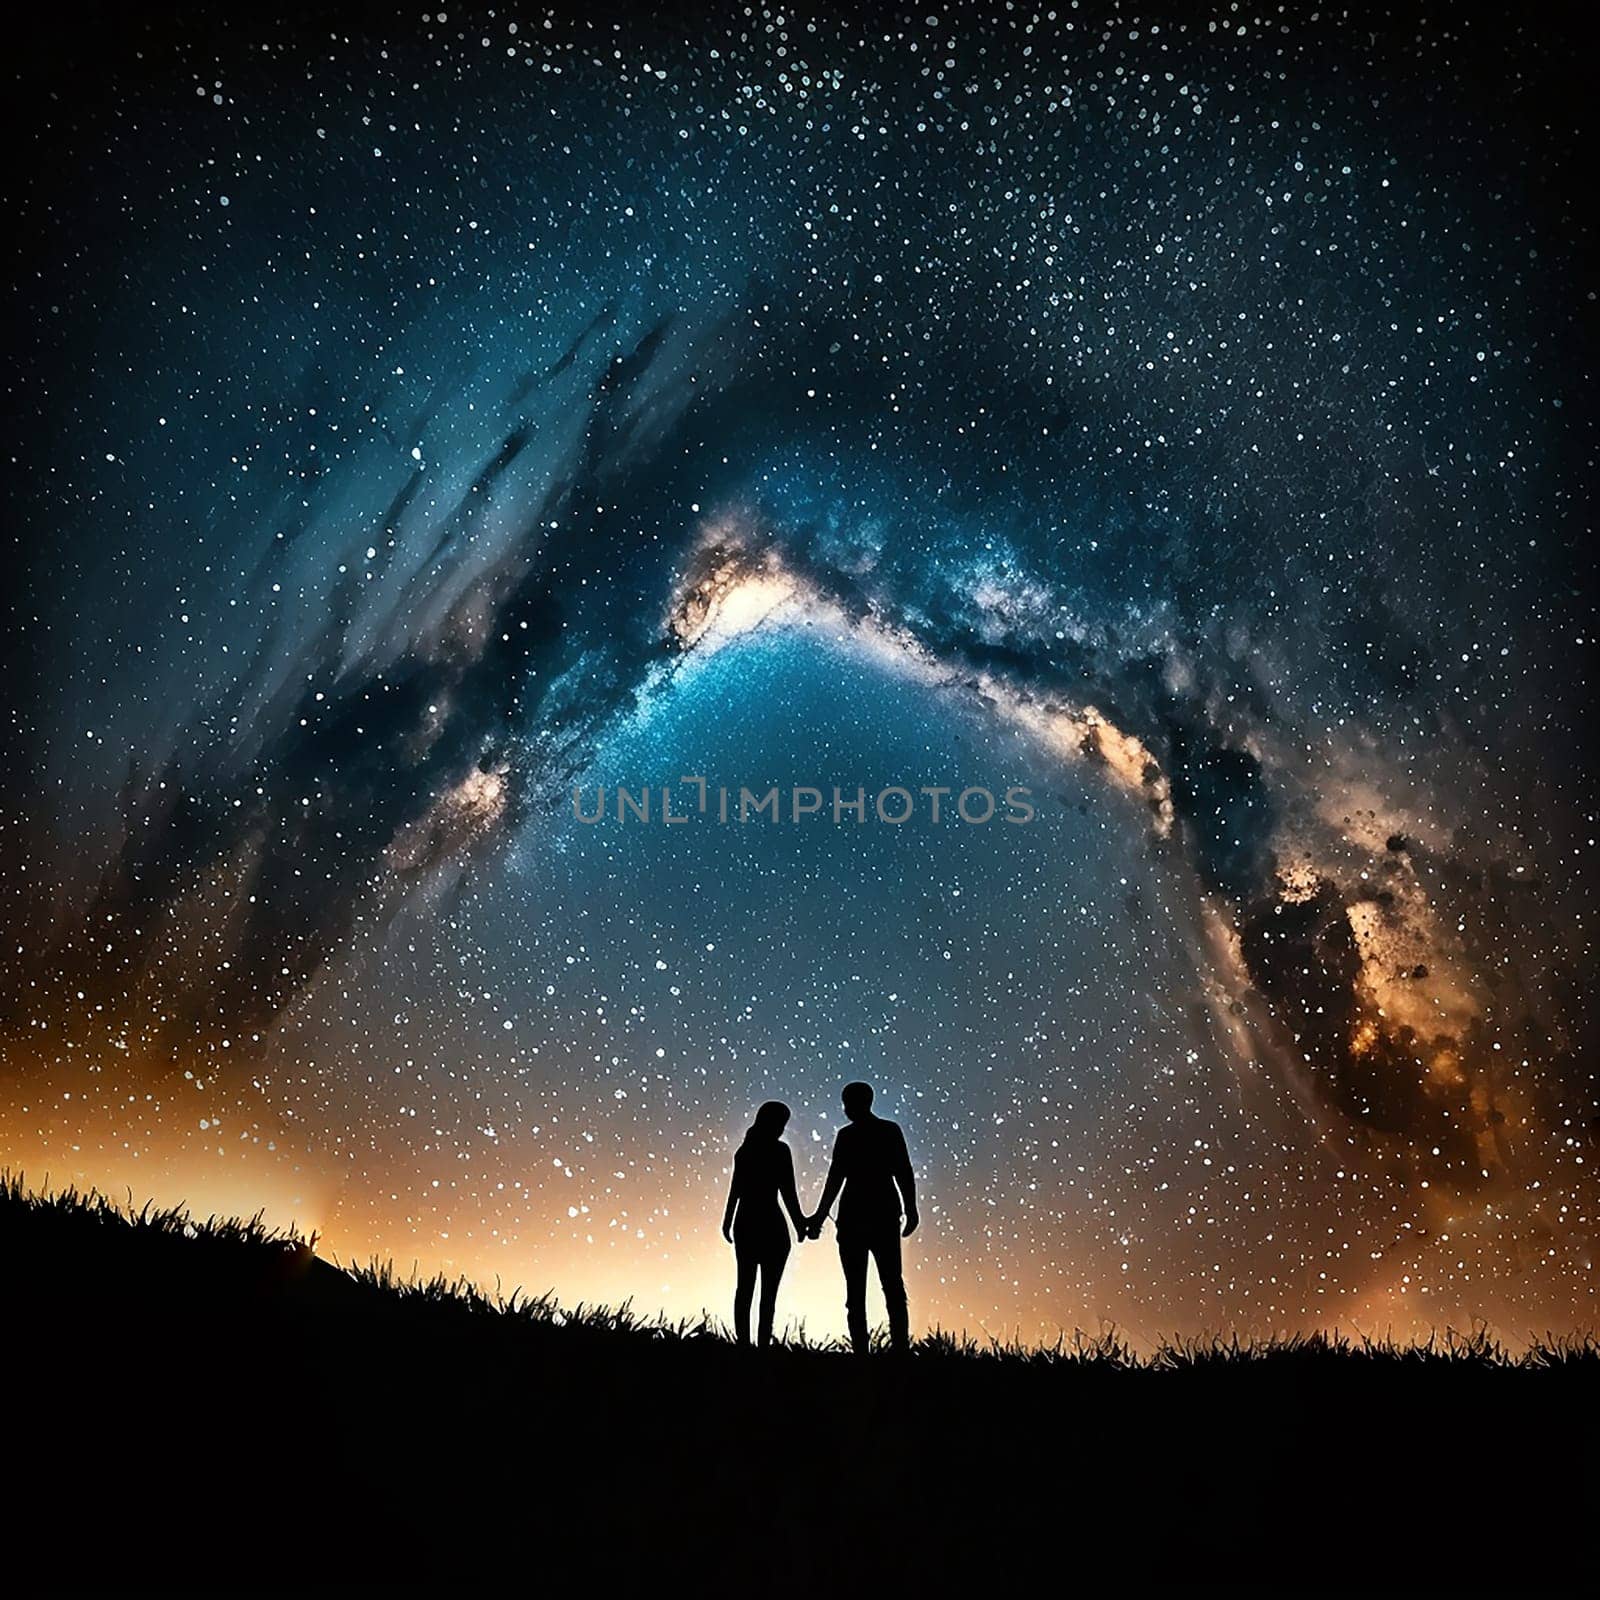 Silhouette of young couple under stars. standing in meadow by night under the galaxy The concept on the theme of love. Elements of this image romance